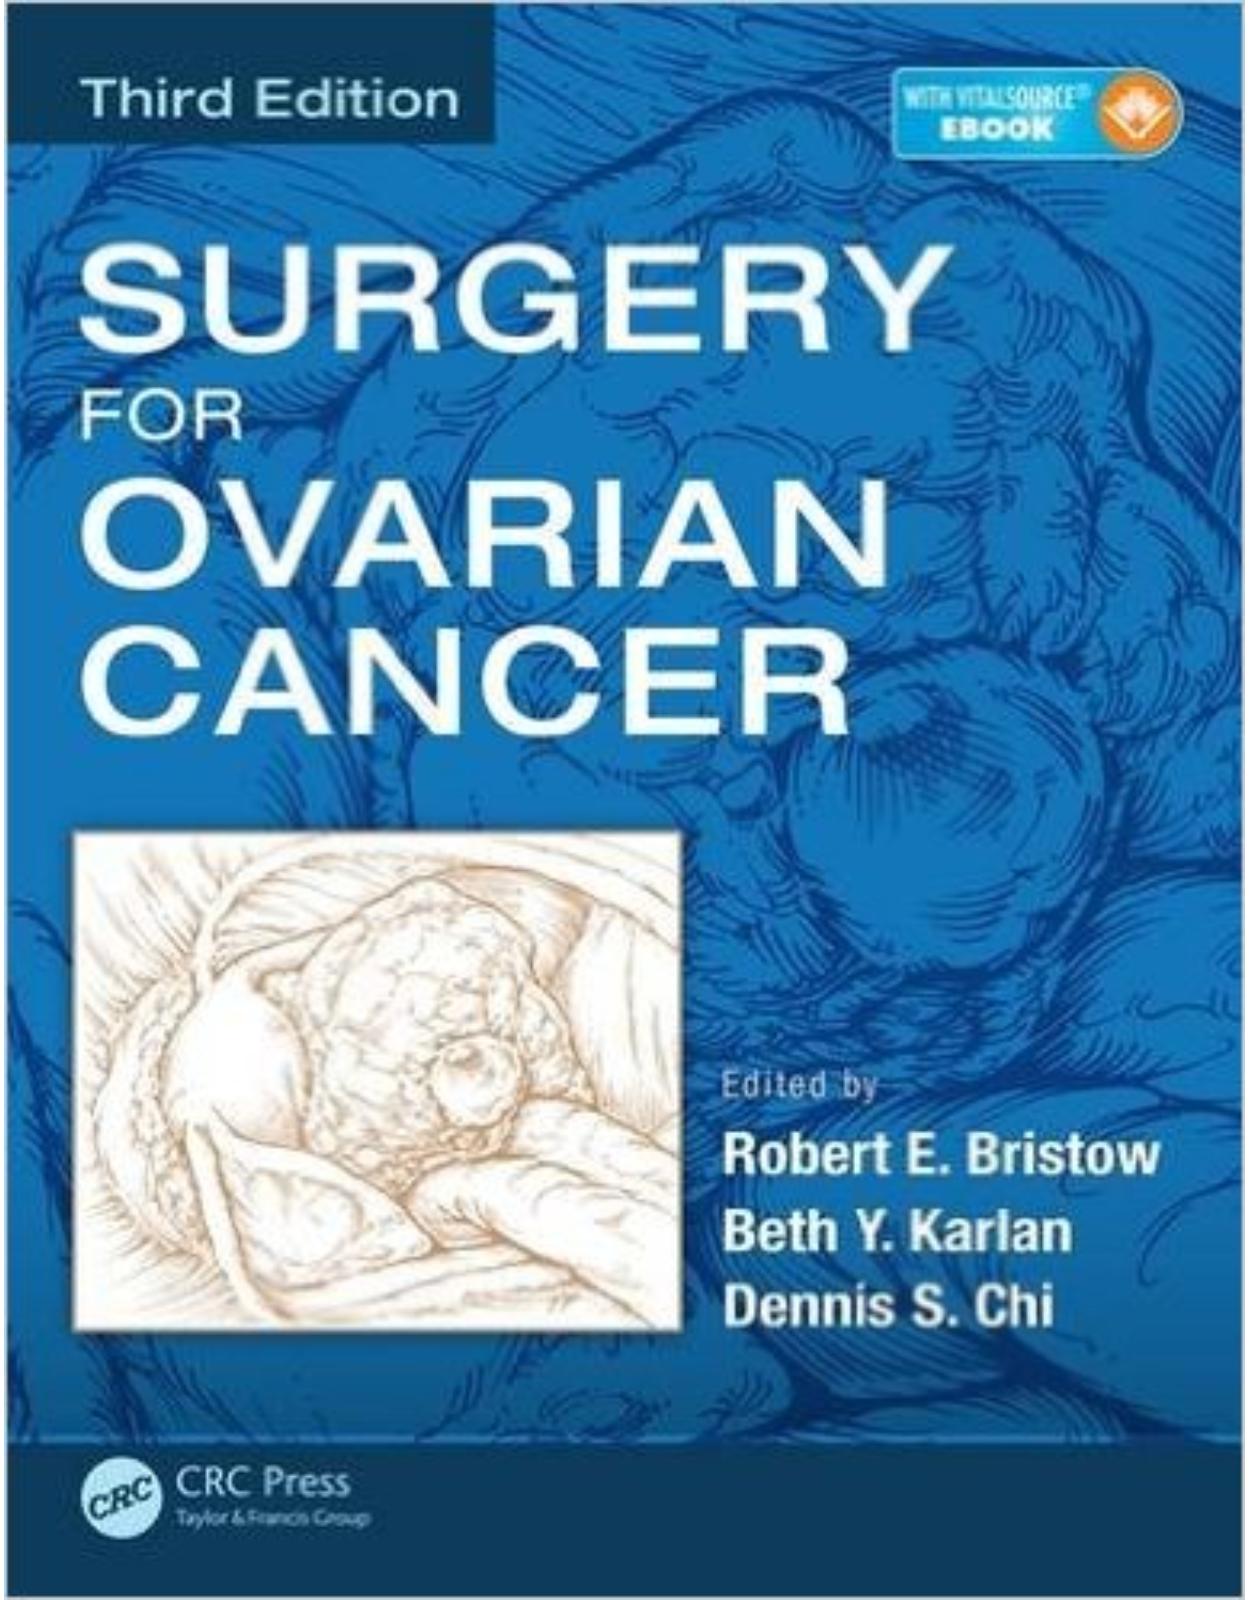 Surgery for Ovarian Cancer, Third Edition